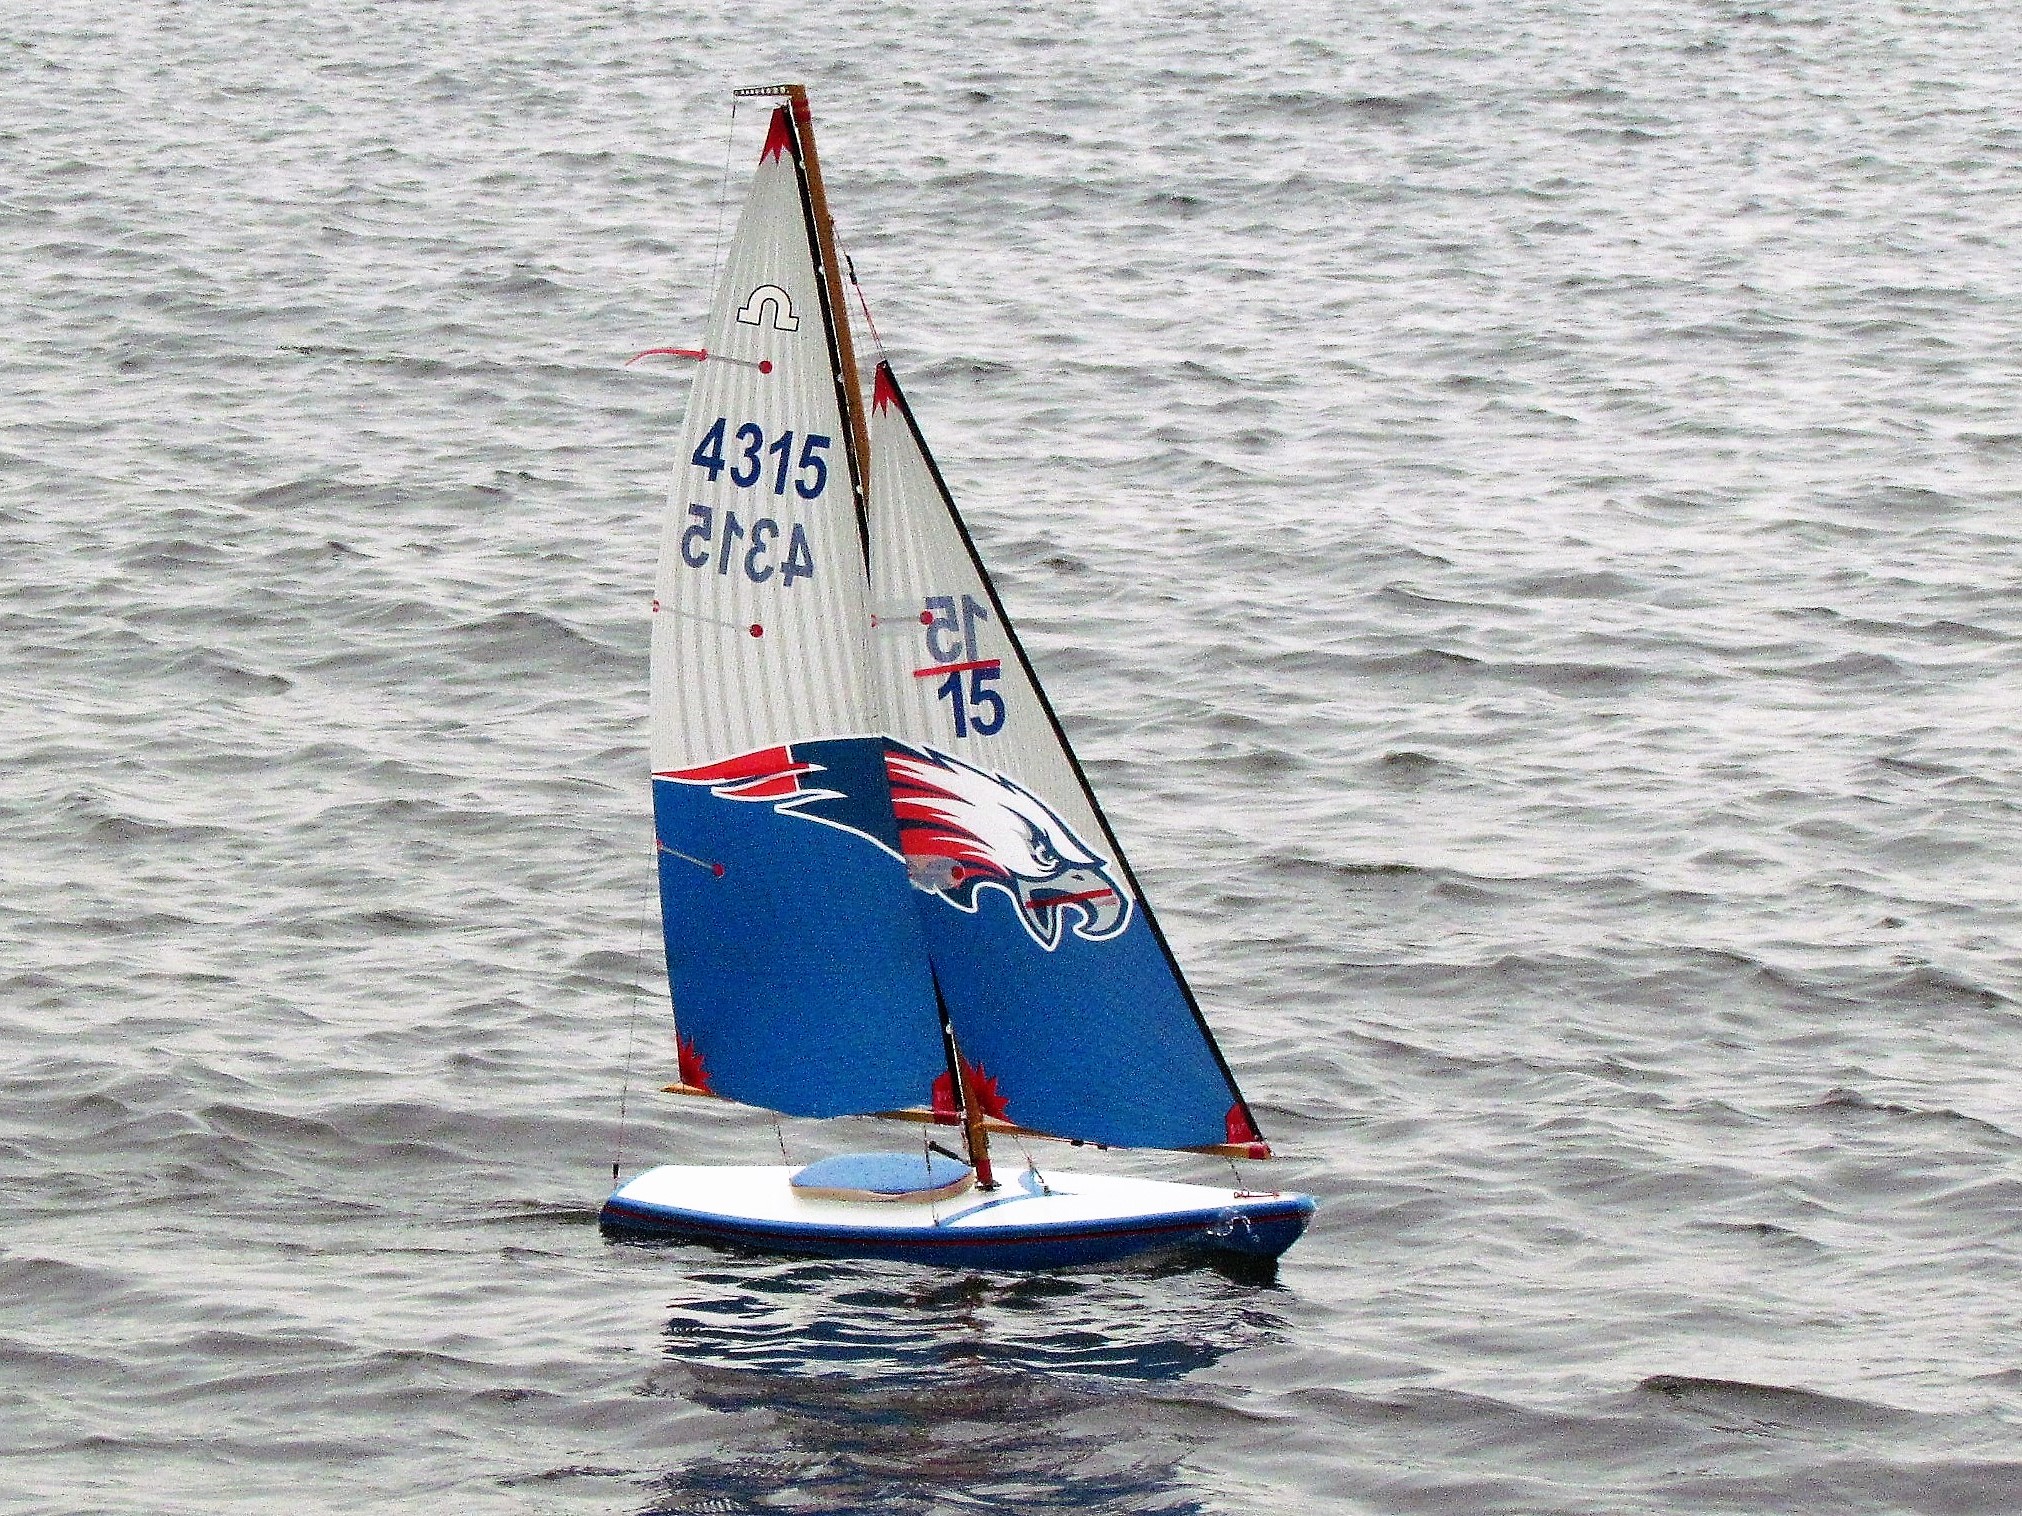 soling 50 rc sailboat for sale